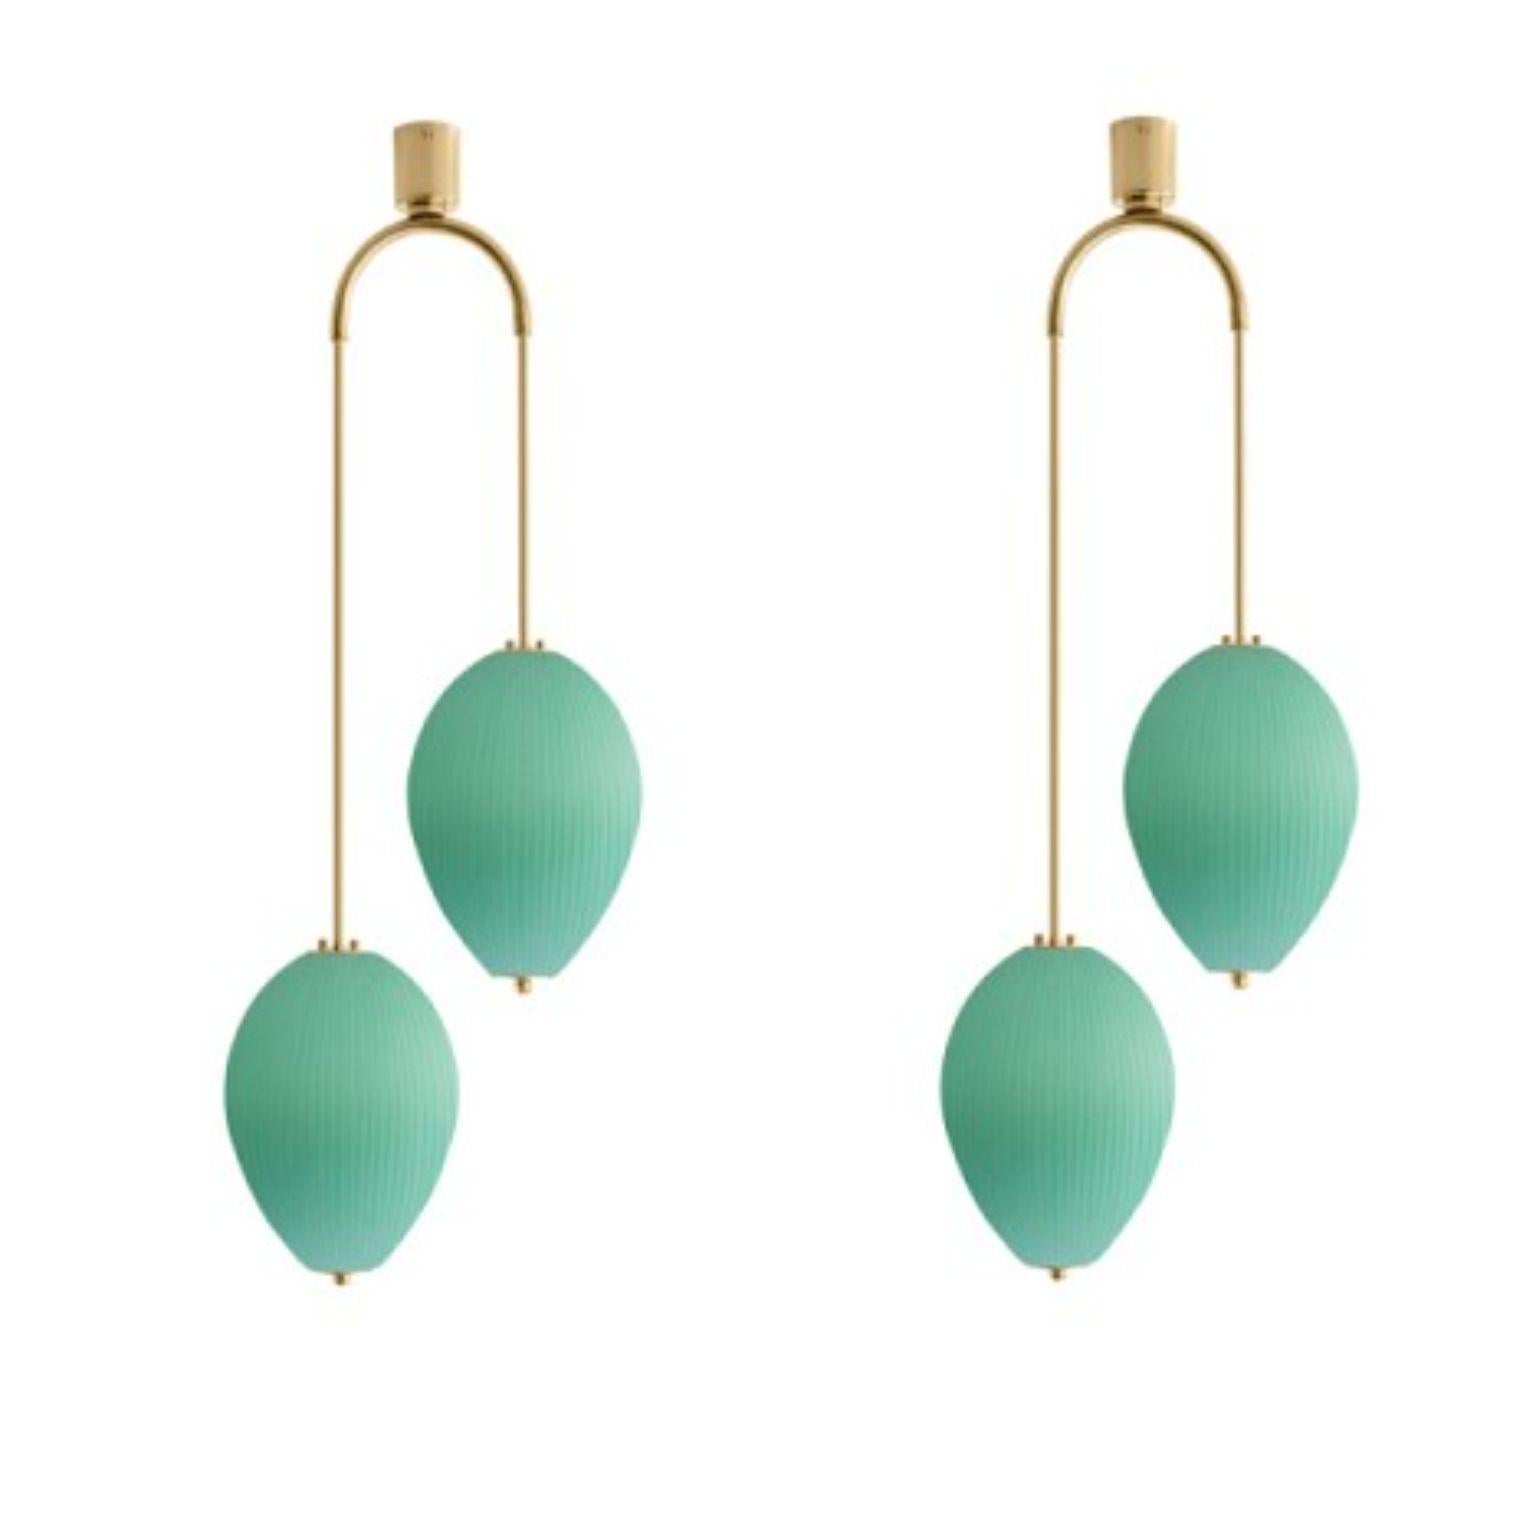 Double chandelier China 10 by Magic Circus Editions
Dimensions: H 121.5 x W 44.3 x D 25.2 cm
Materials: Brass, mouth blown glass sculpted with a diamond saw
Colour: jade green

Available finishes: Brass, nickel
Available colours: enamel soft white,